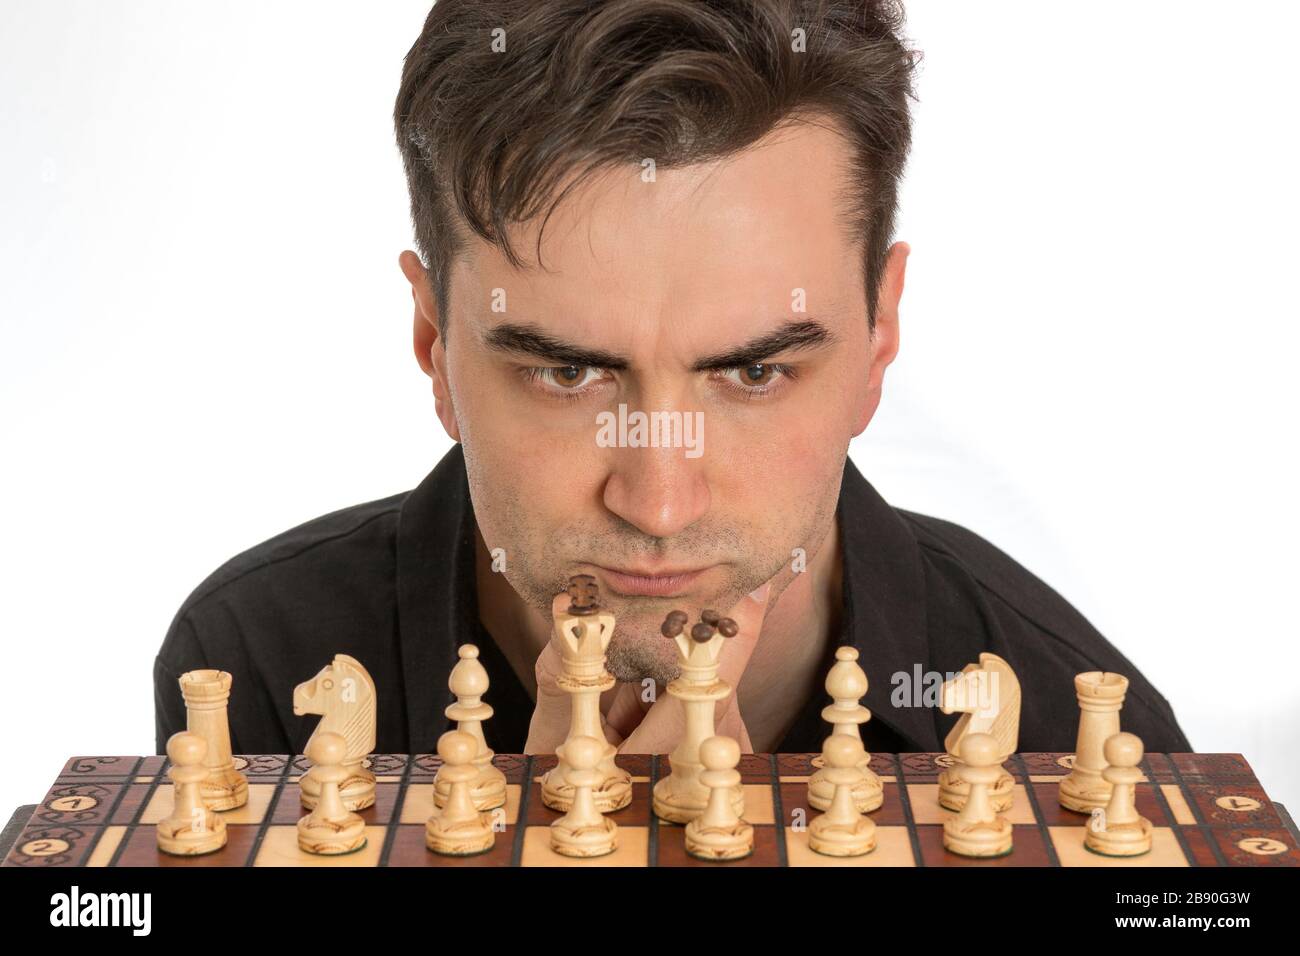 Male chess player contemplating his first move in front of white background. Royalty free stock photo. Stock Photo